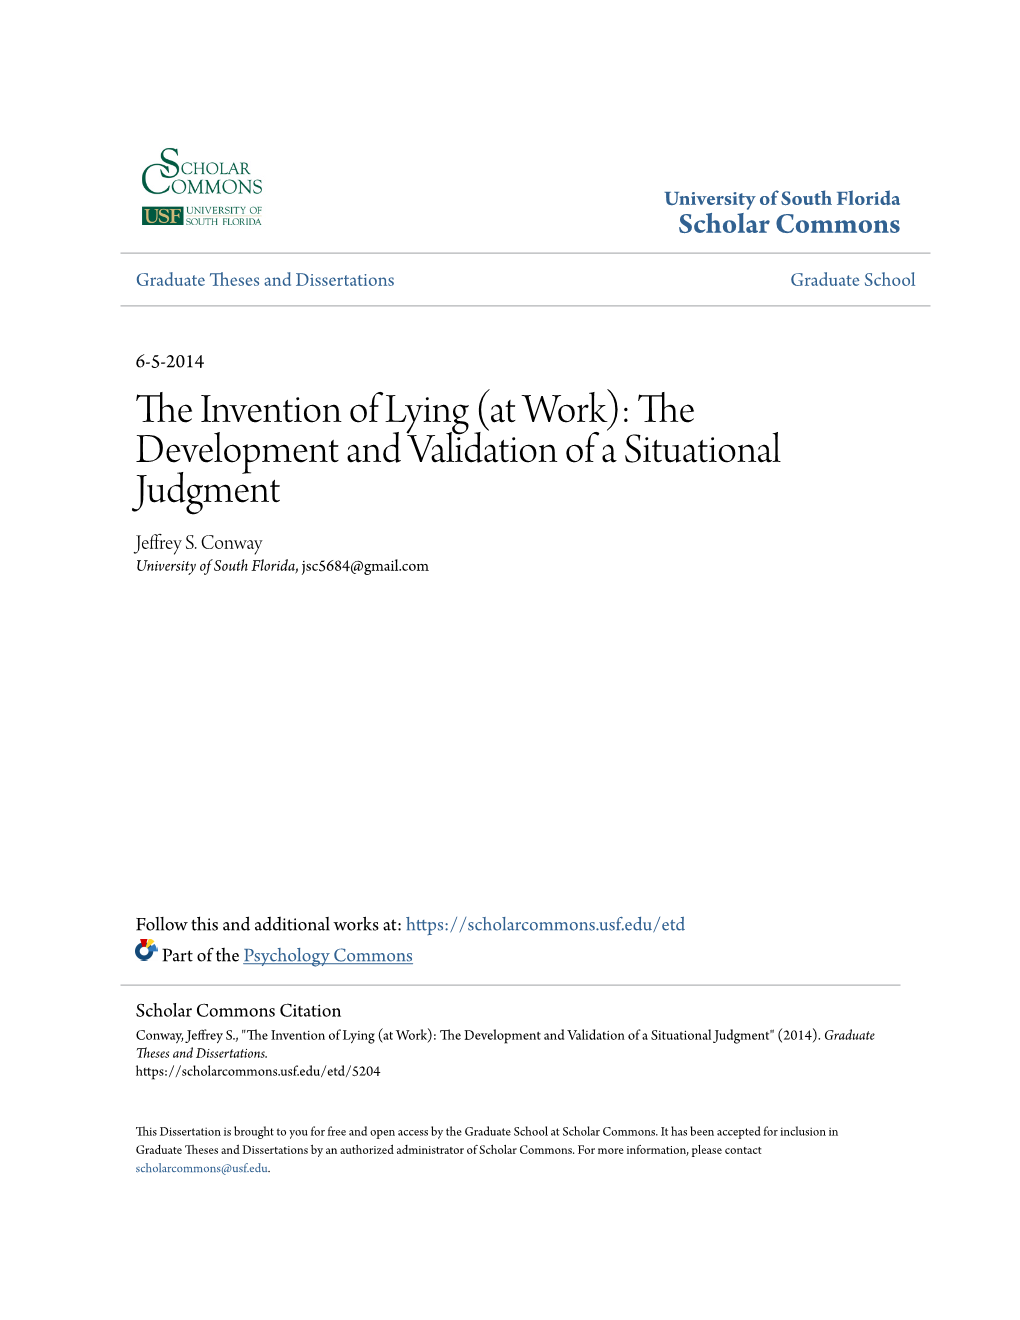 The Invention of Lying (At Work): the Development and Validation of a Situational Judgment